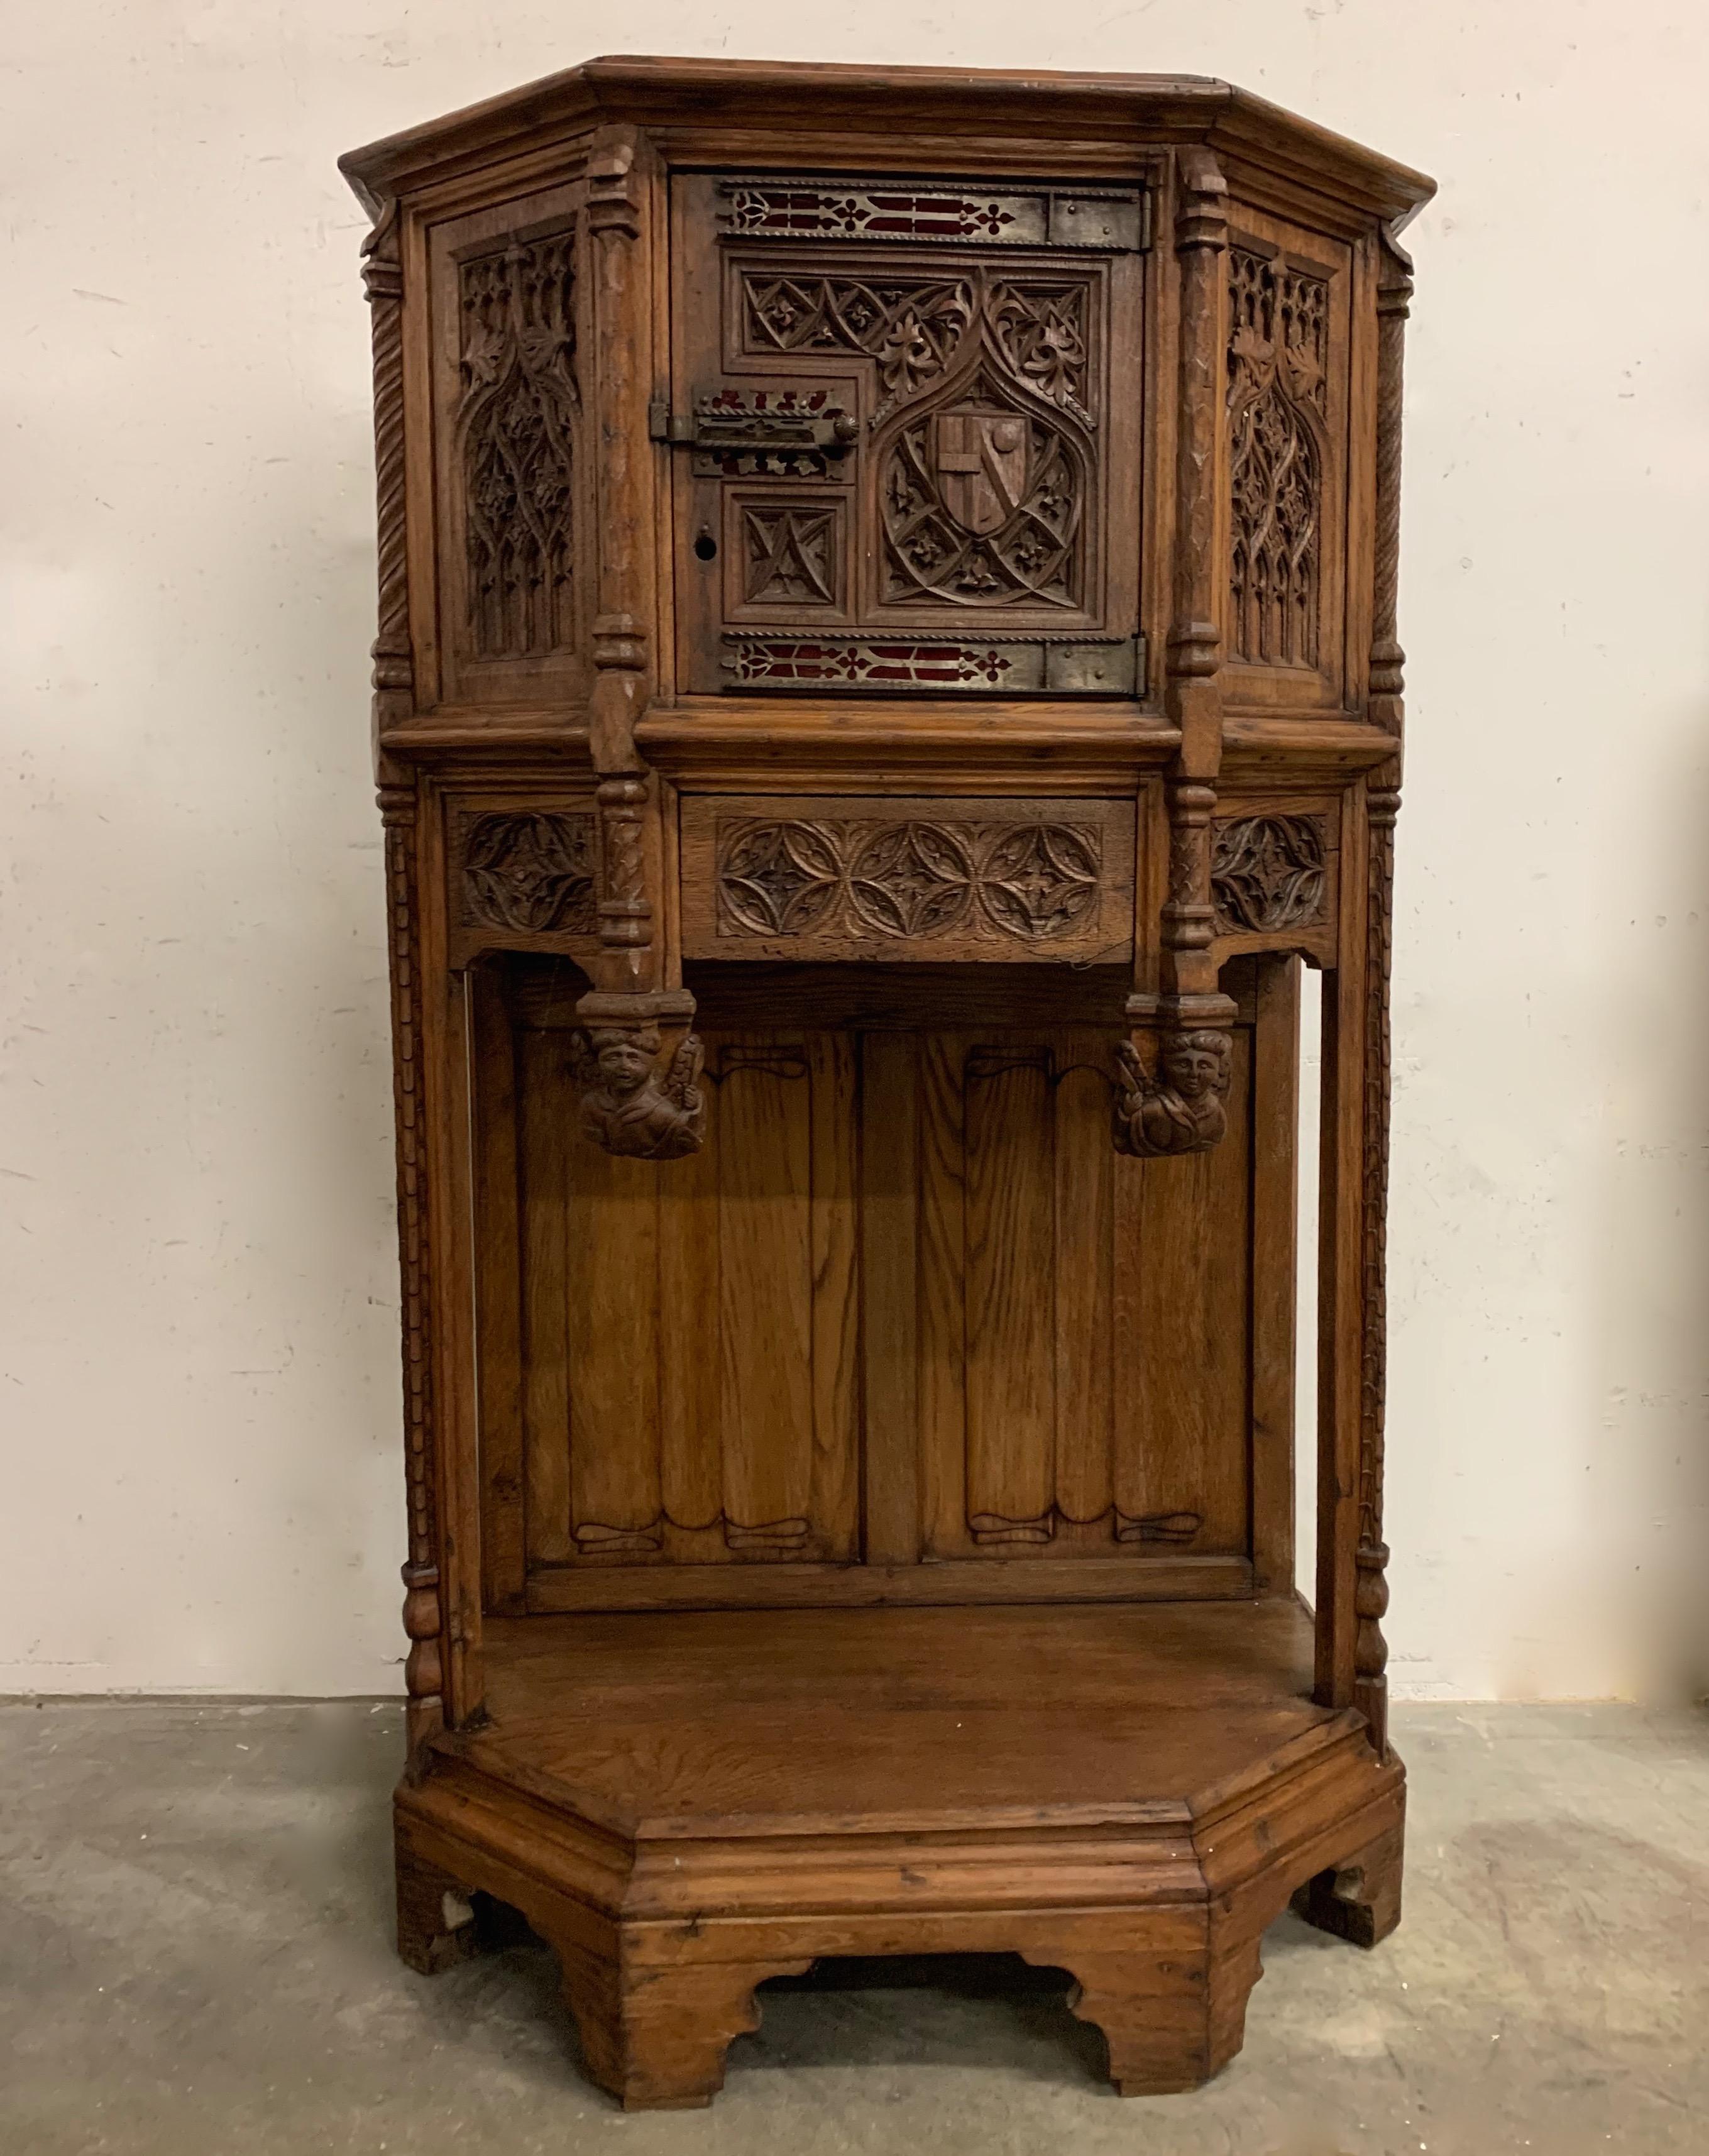 Another piece of Gothic Art furniture. This time with a special feature.

This handcrafted Gothic Revival cabinet or credenza with drawer from the late 19th century is actually made with the use of hand carved oak panels from the 18th century. These